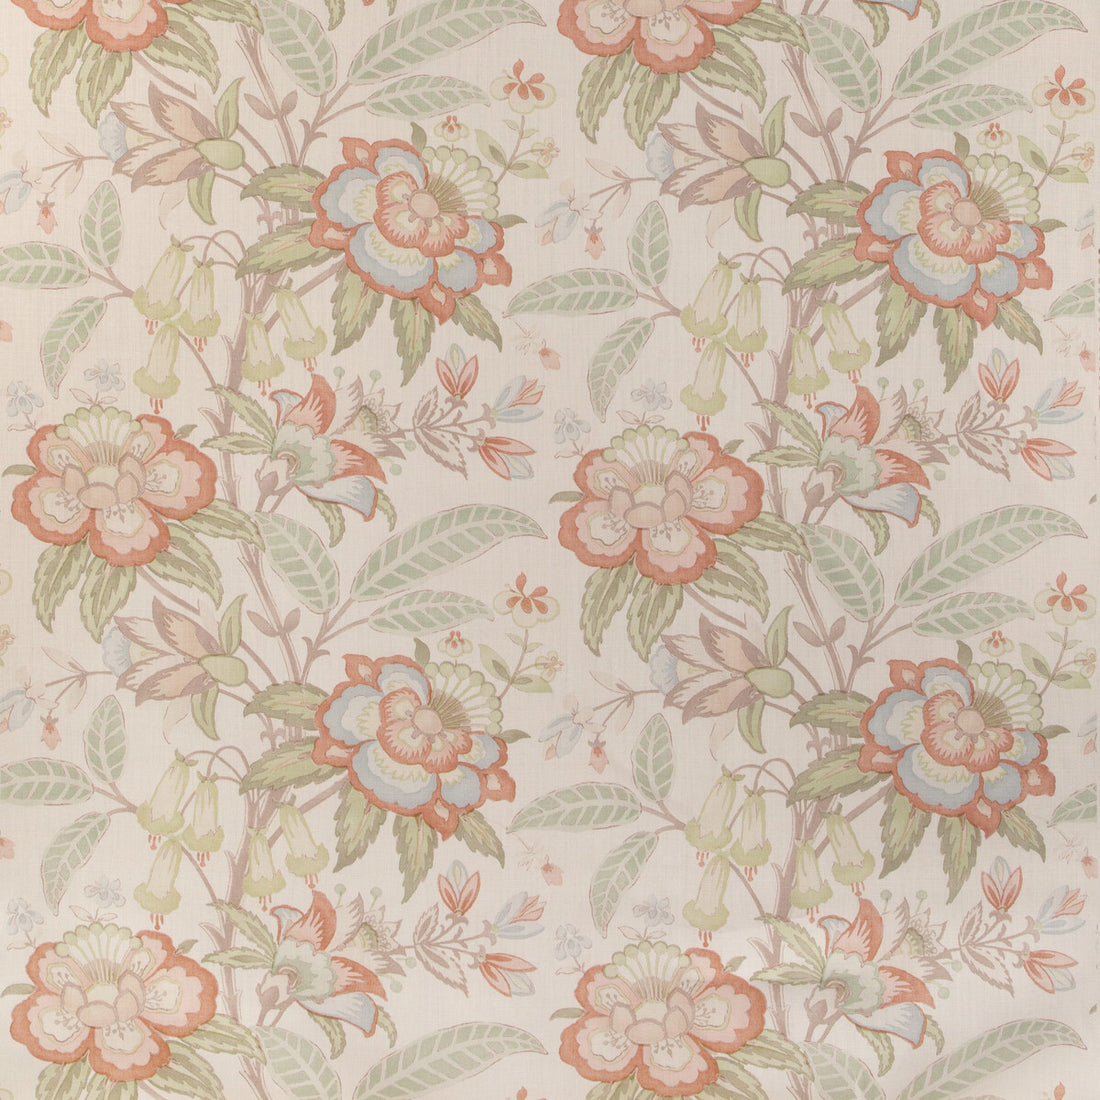 Davenport Print fabric in coral color - pattern 2017164.312.0 - by Lee Jofa in the Garden Walk collection